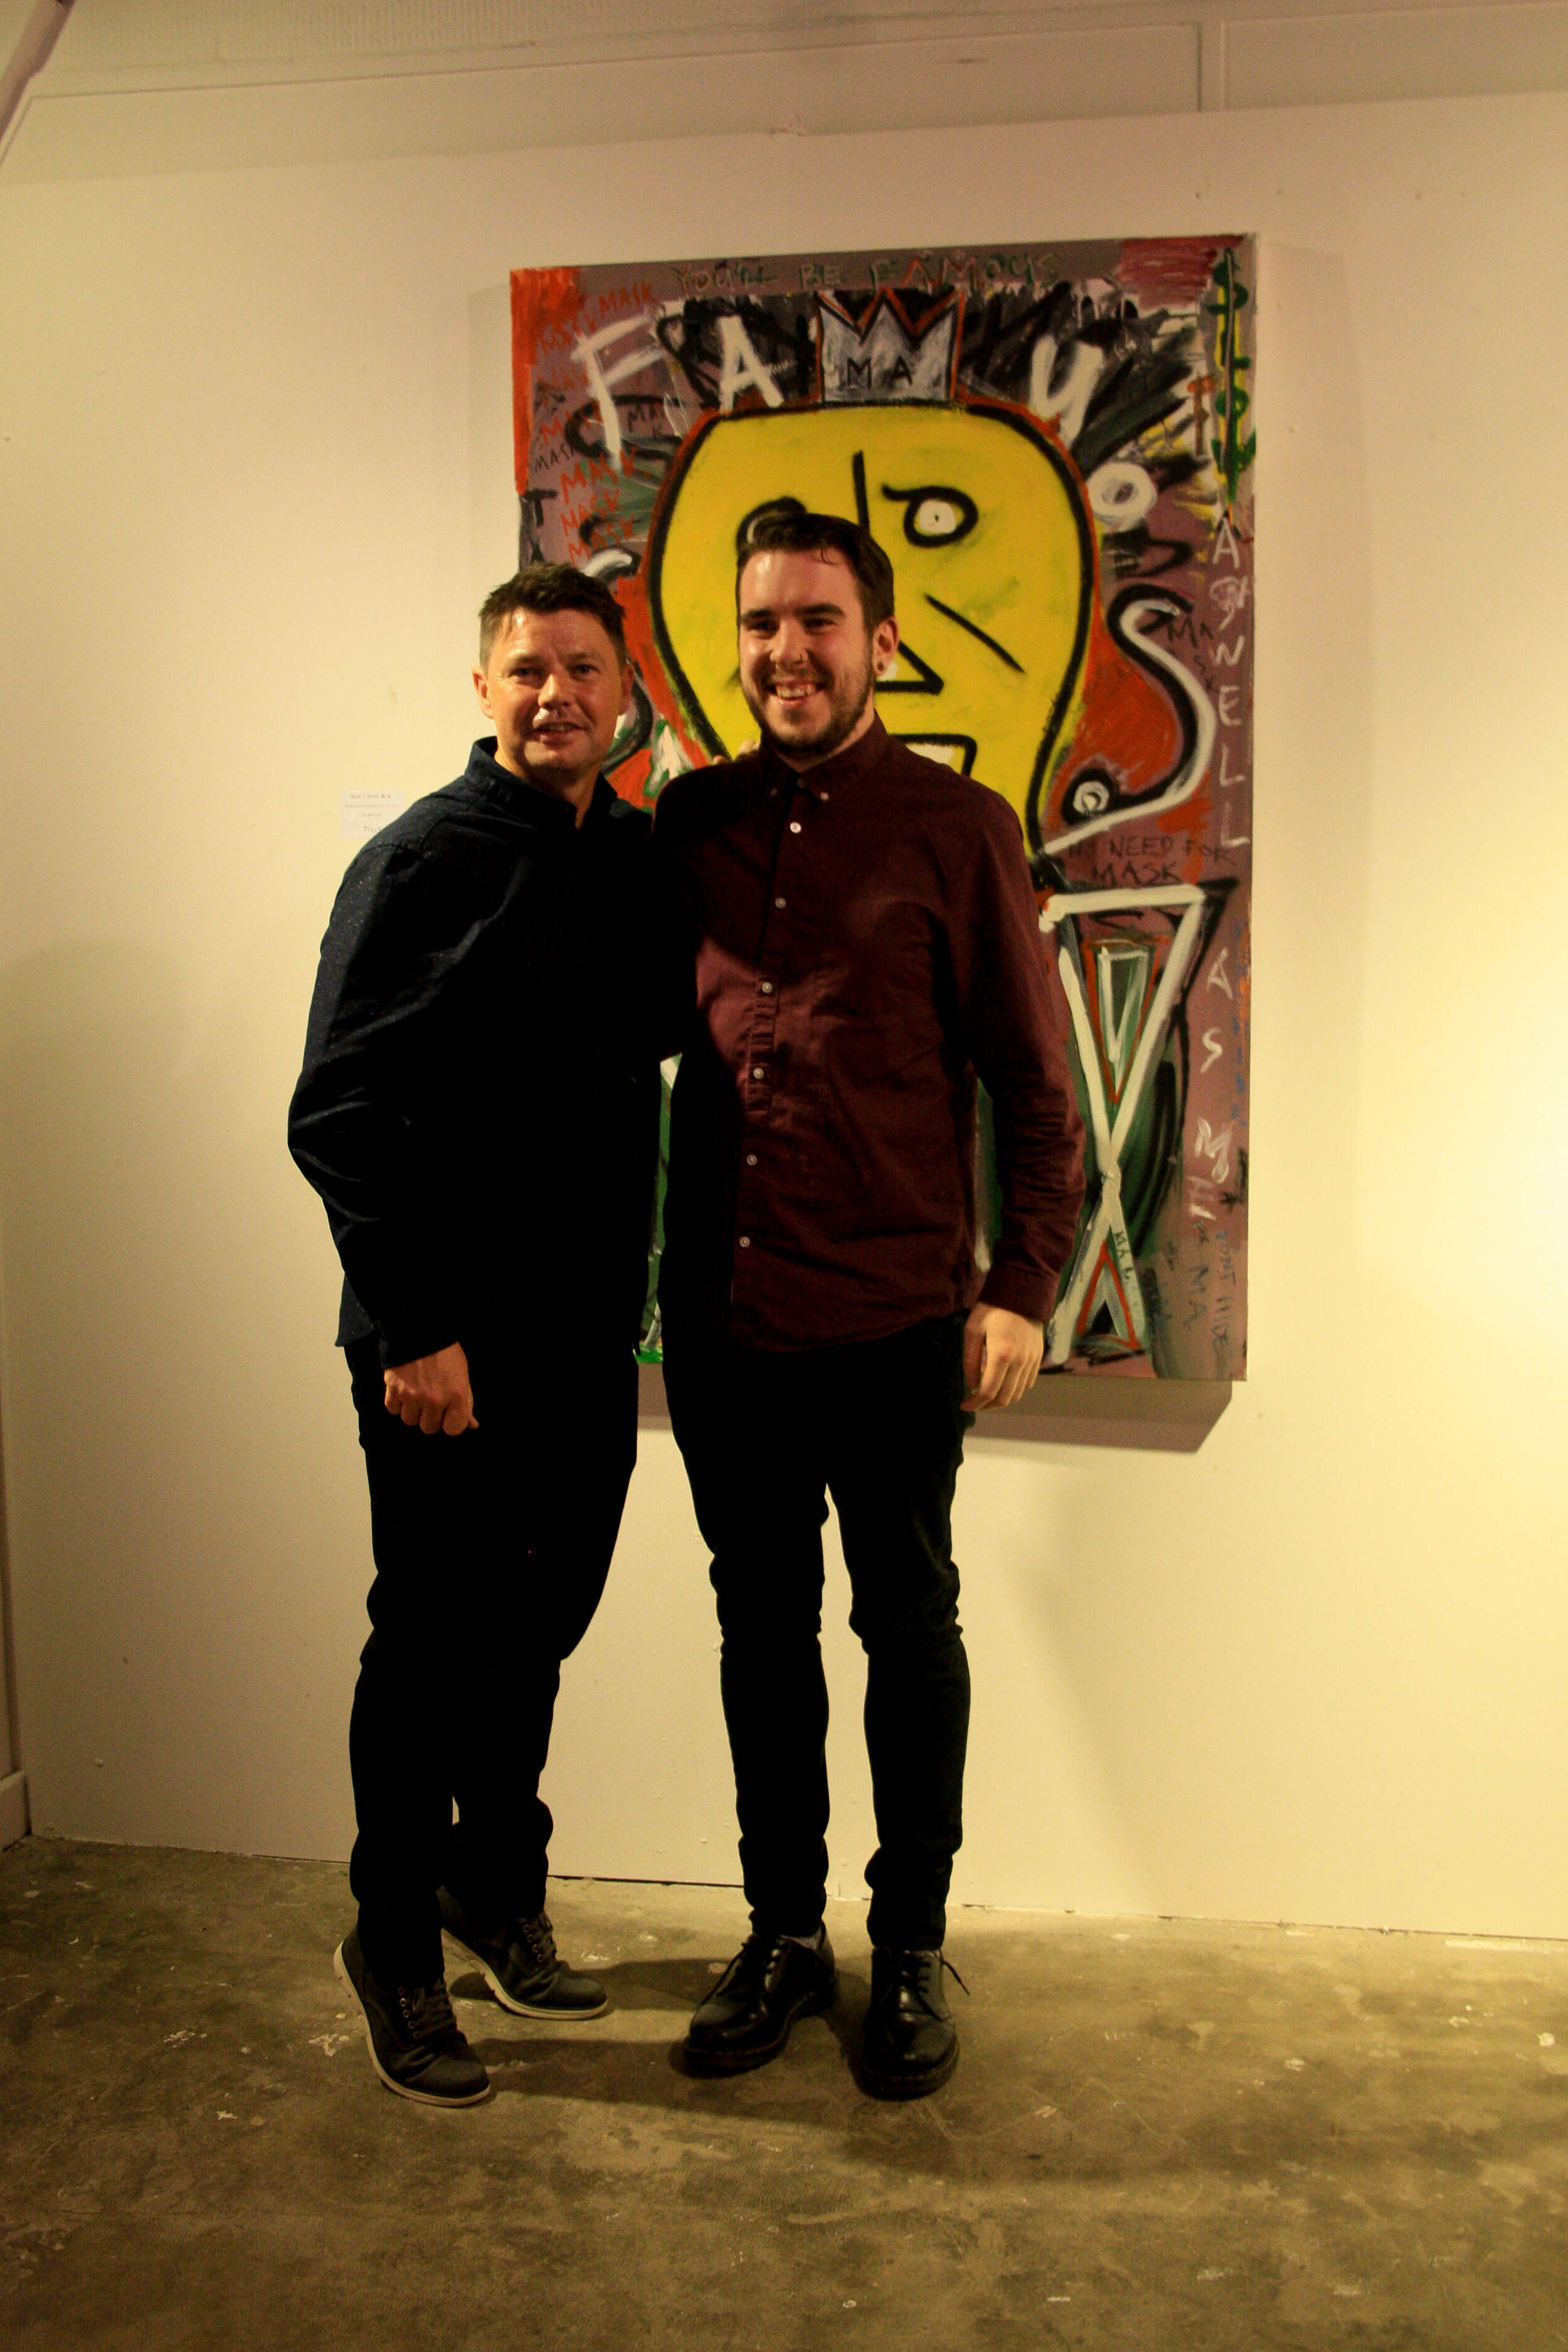 Film maker Mike Andrews and contemporary artist Pigsy photographed at PIGSY's art exhibition in Dublin City Centre in Ireland